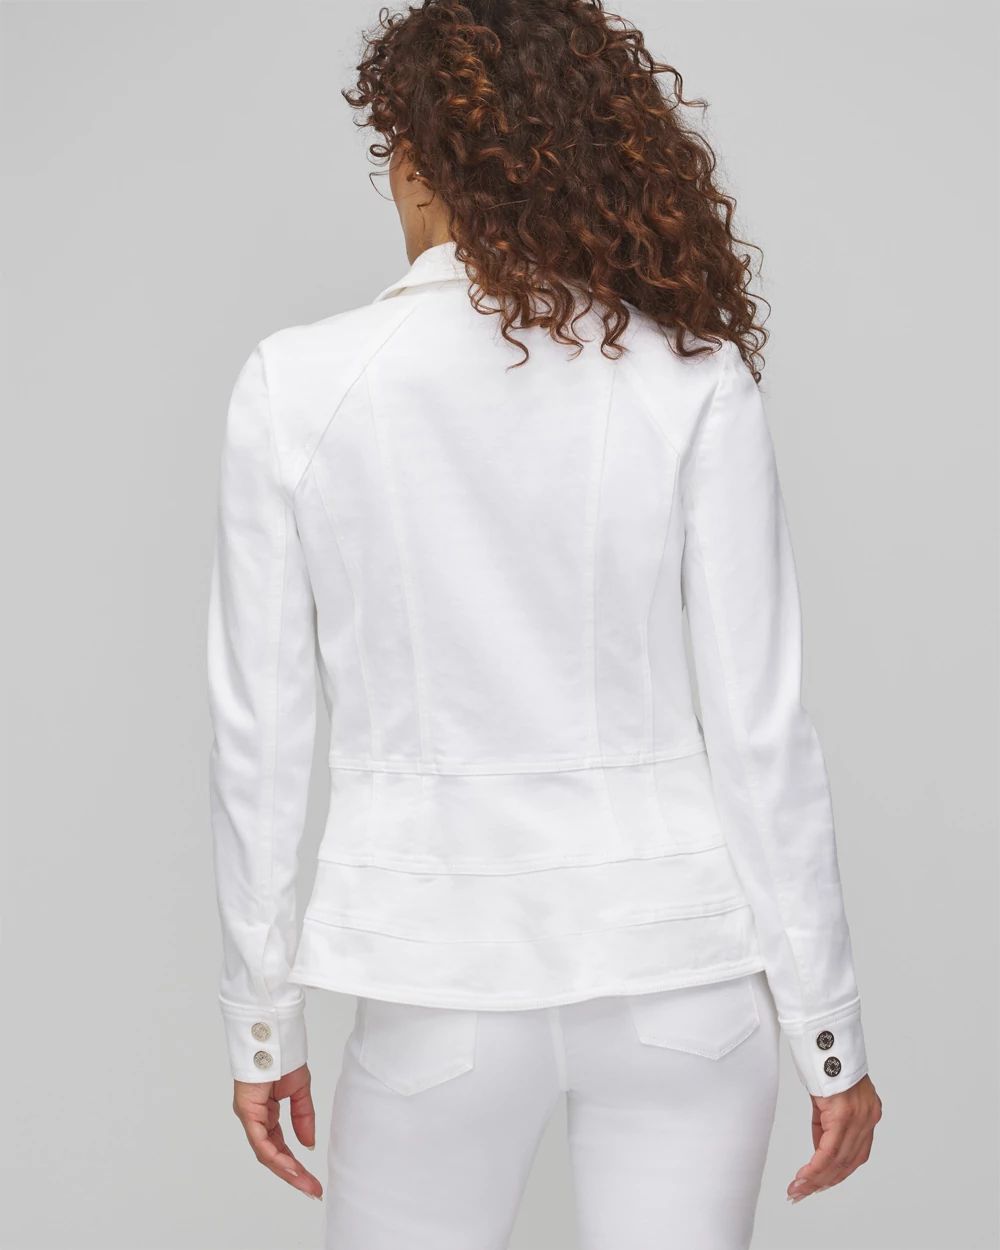 Petite Seamed White Denim Jacket click to view larger image.